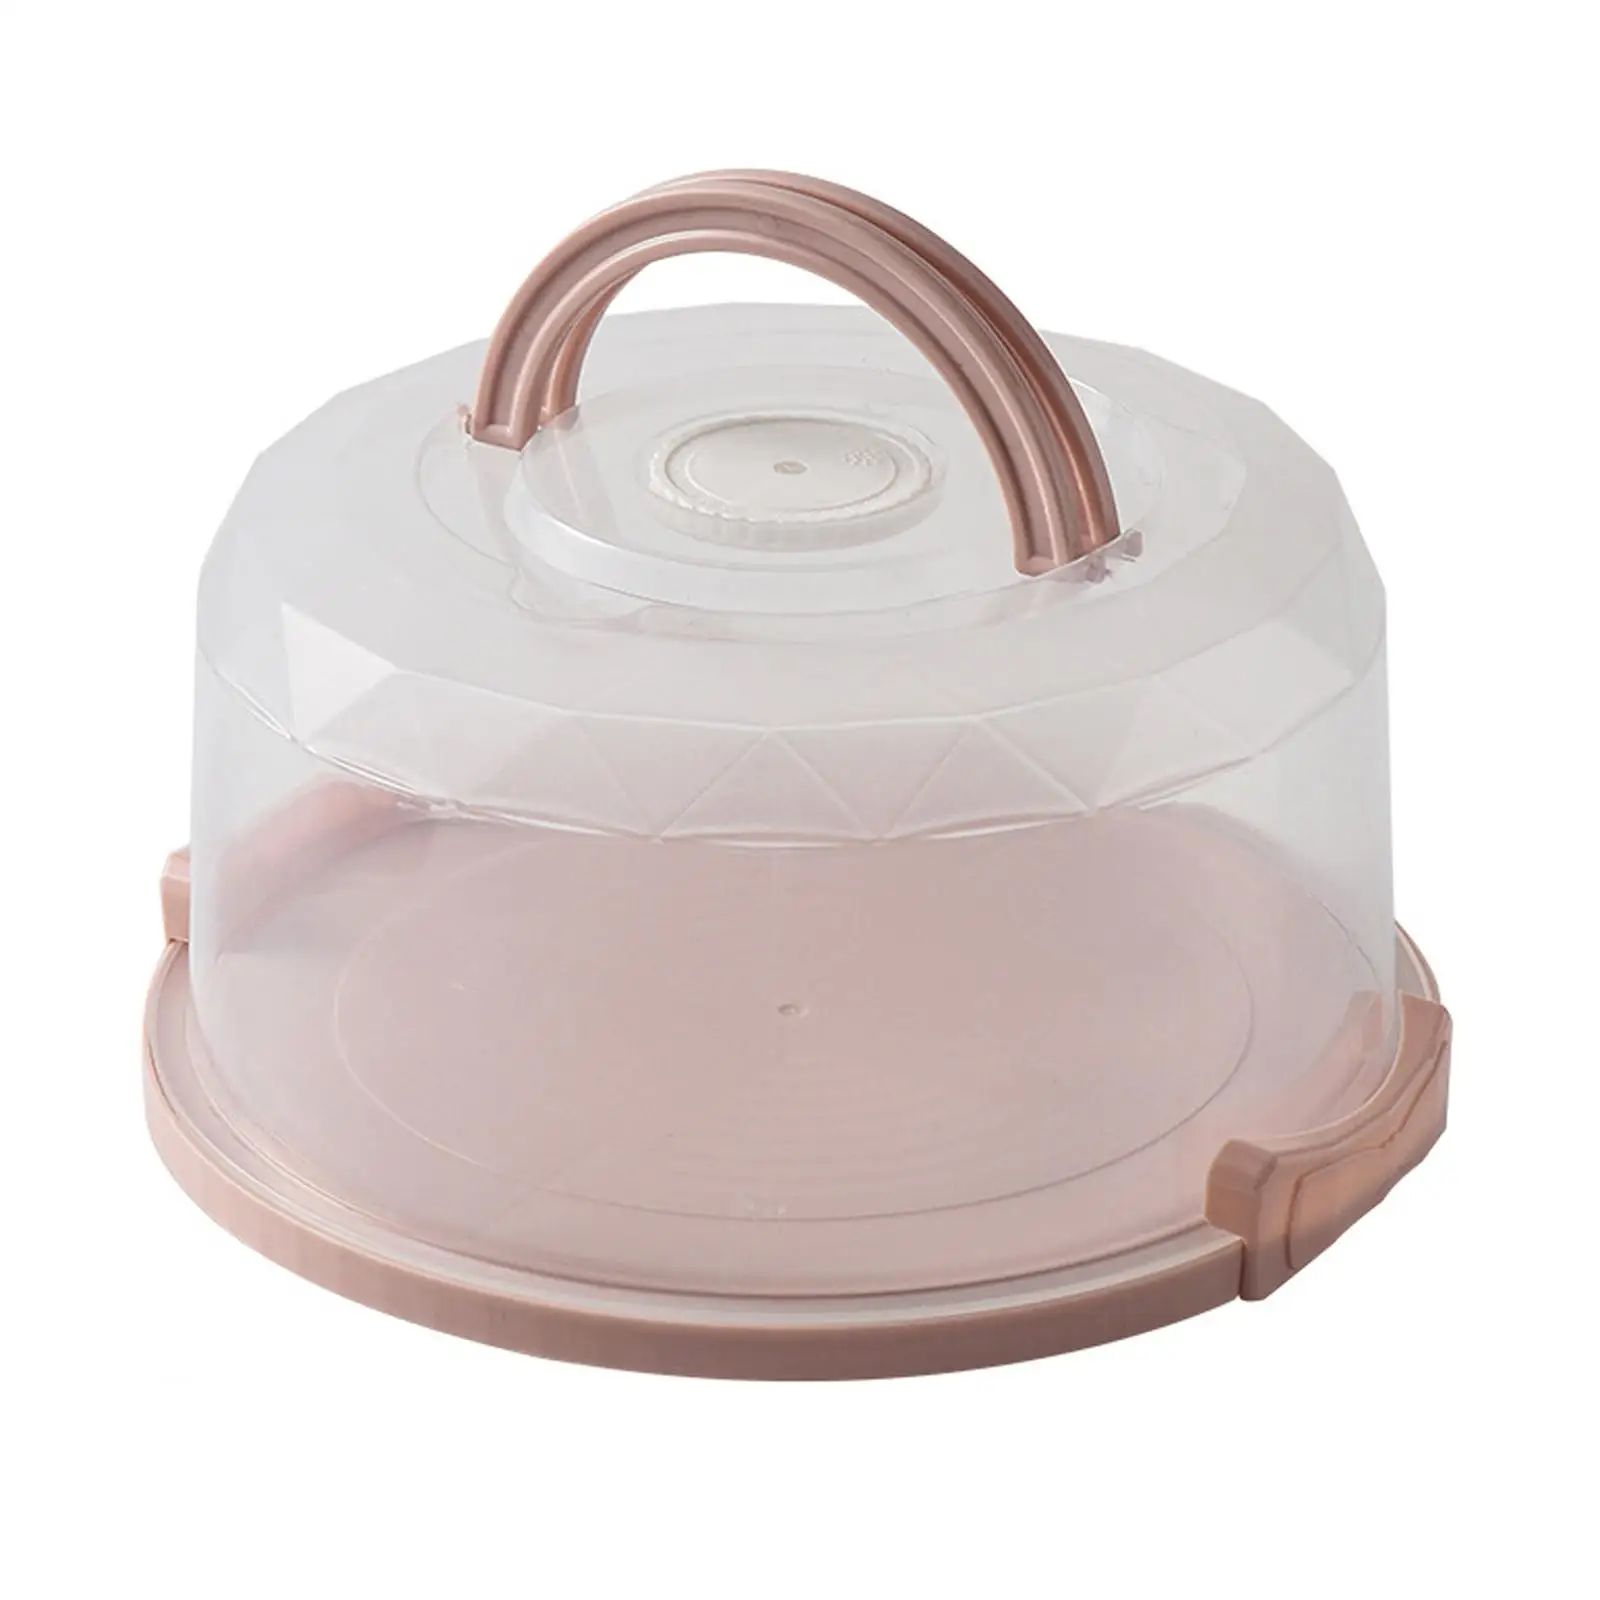 8inch Pie Cake Carrier with Lid and Handle, Cake Transport Container, Portable